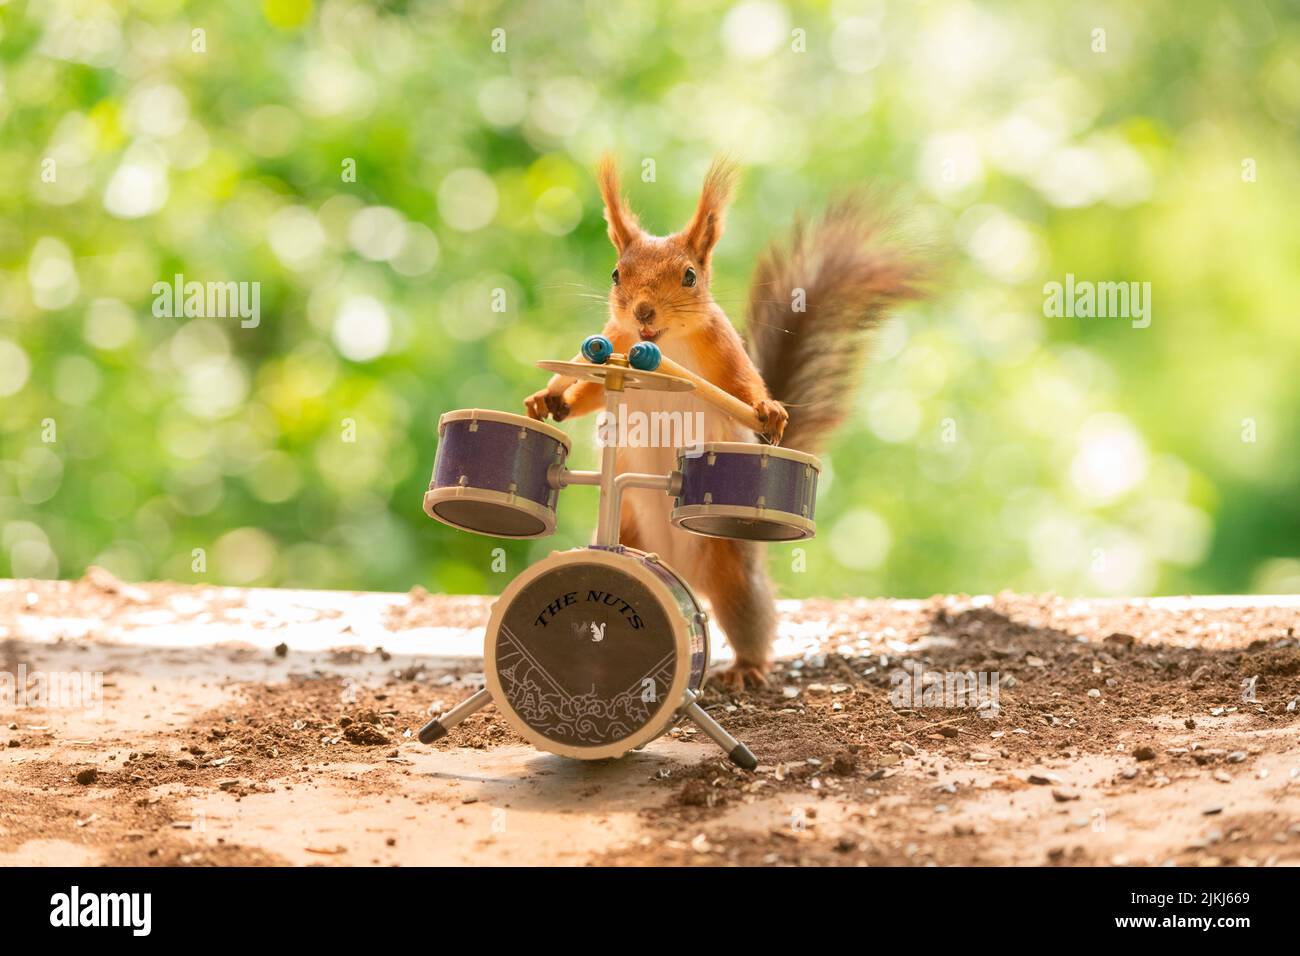 Red Squirrel is holding drum sticks with drums Stock Photo